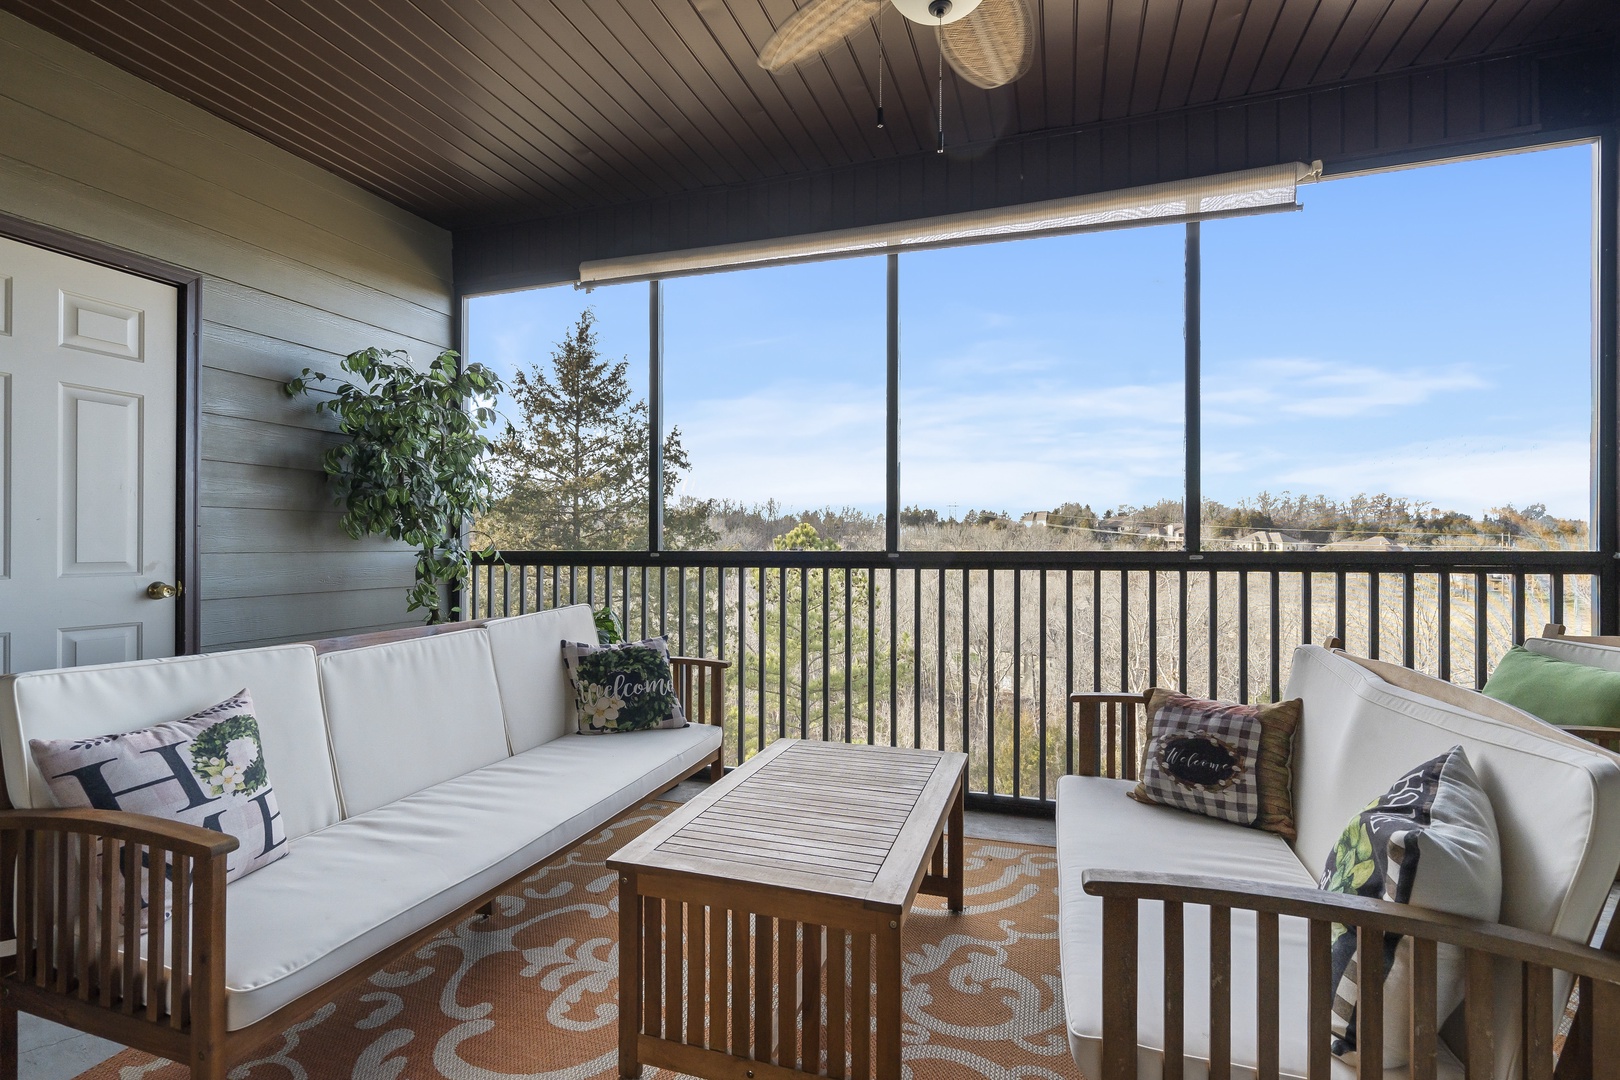 Relish the crisp breeze on the covered deck